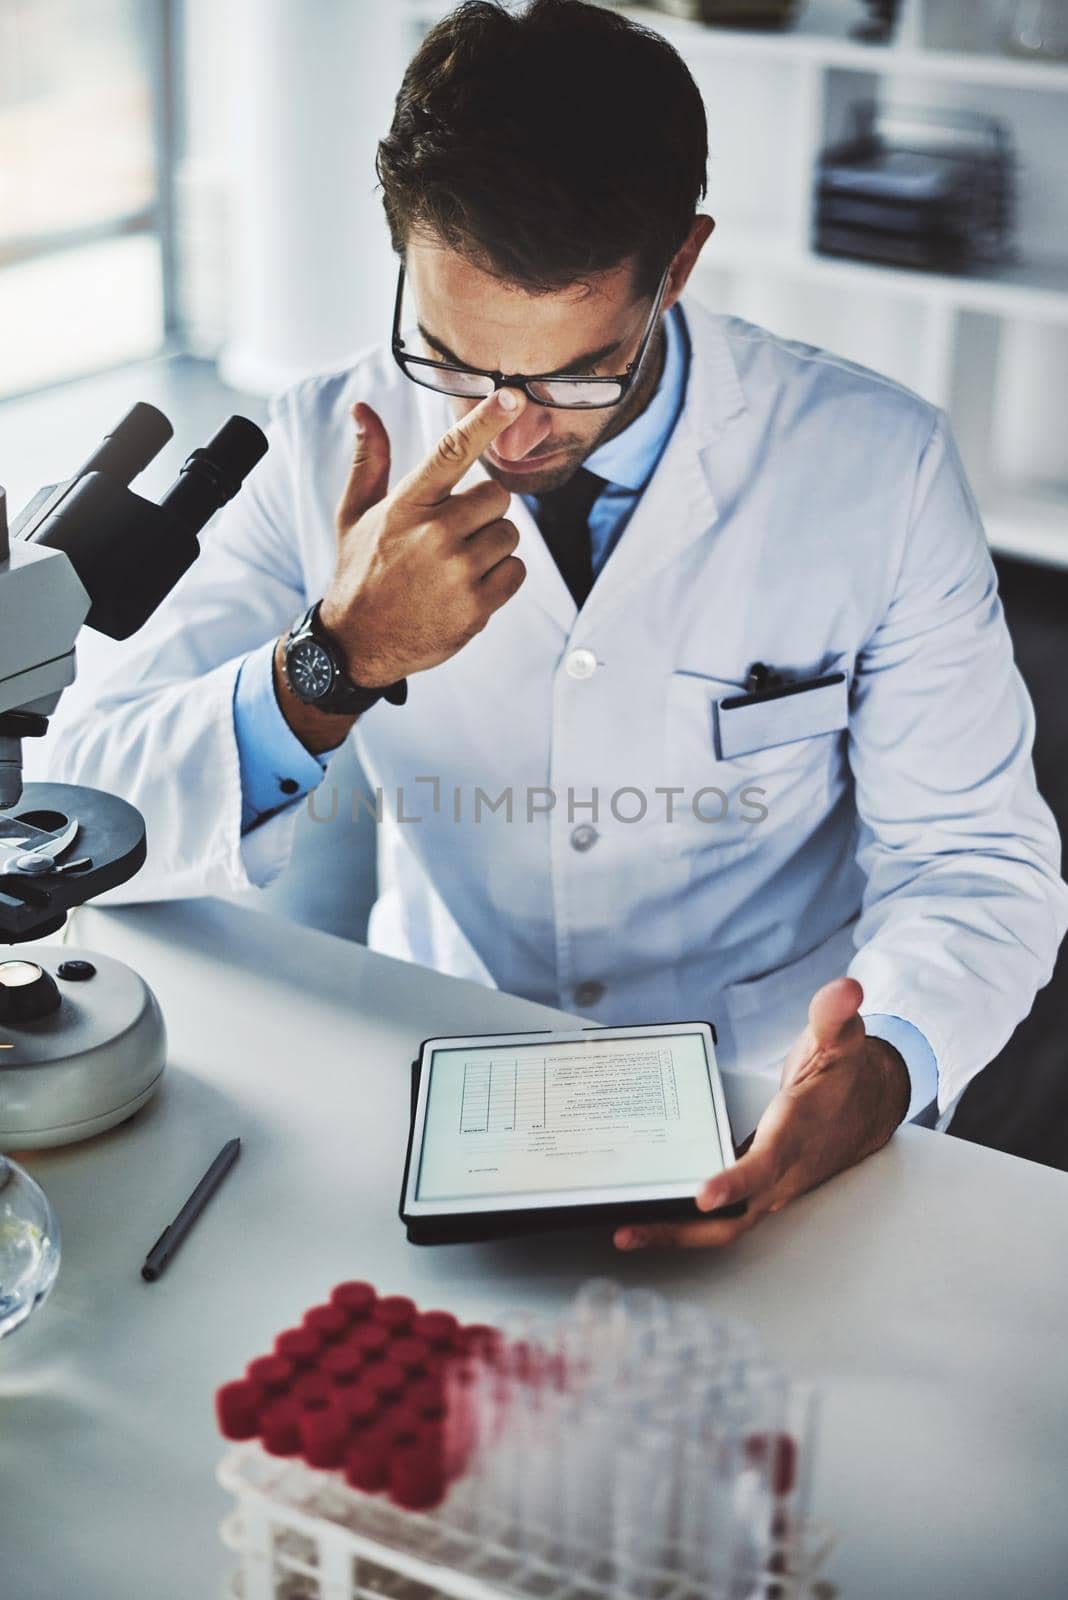 Taking scientific research to the next level. Shot of a scientist using a digital tablet while working in a lab. by YuriArcurs